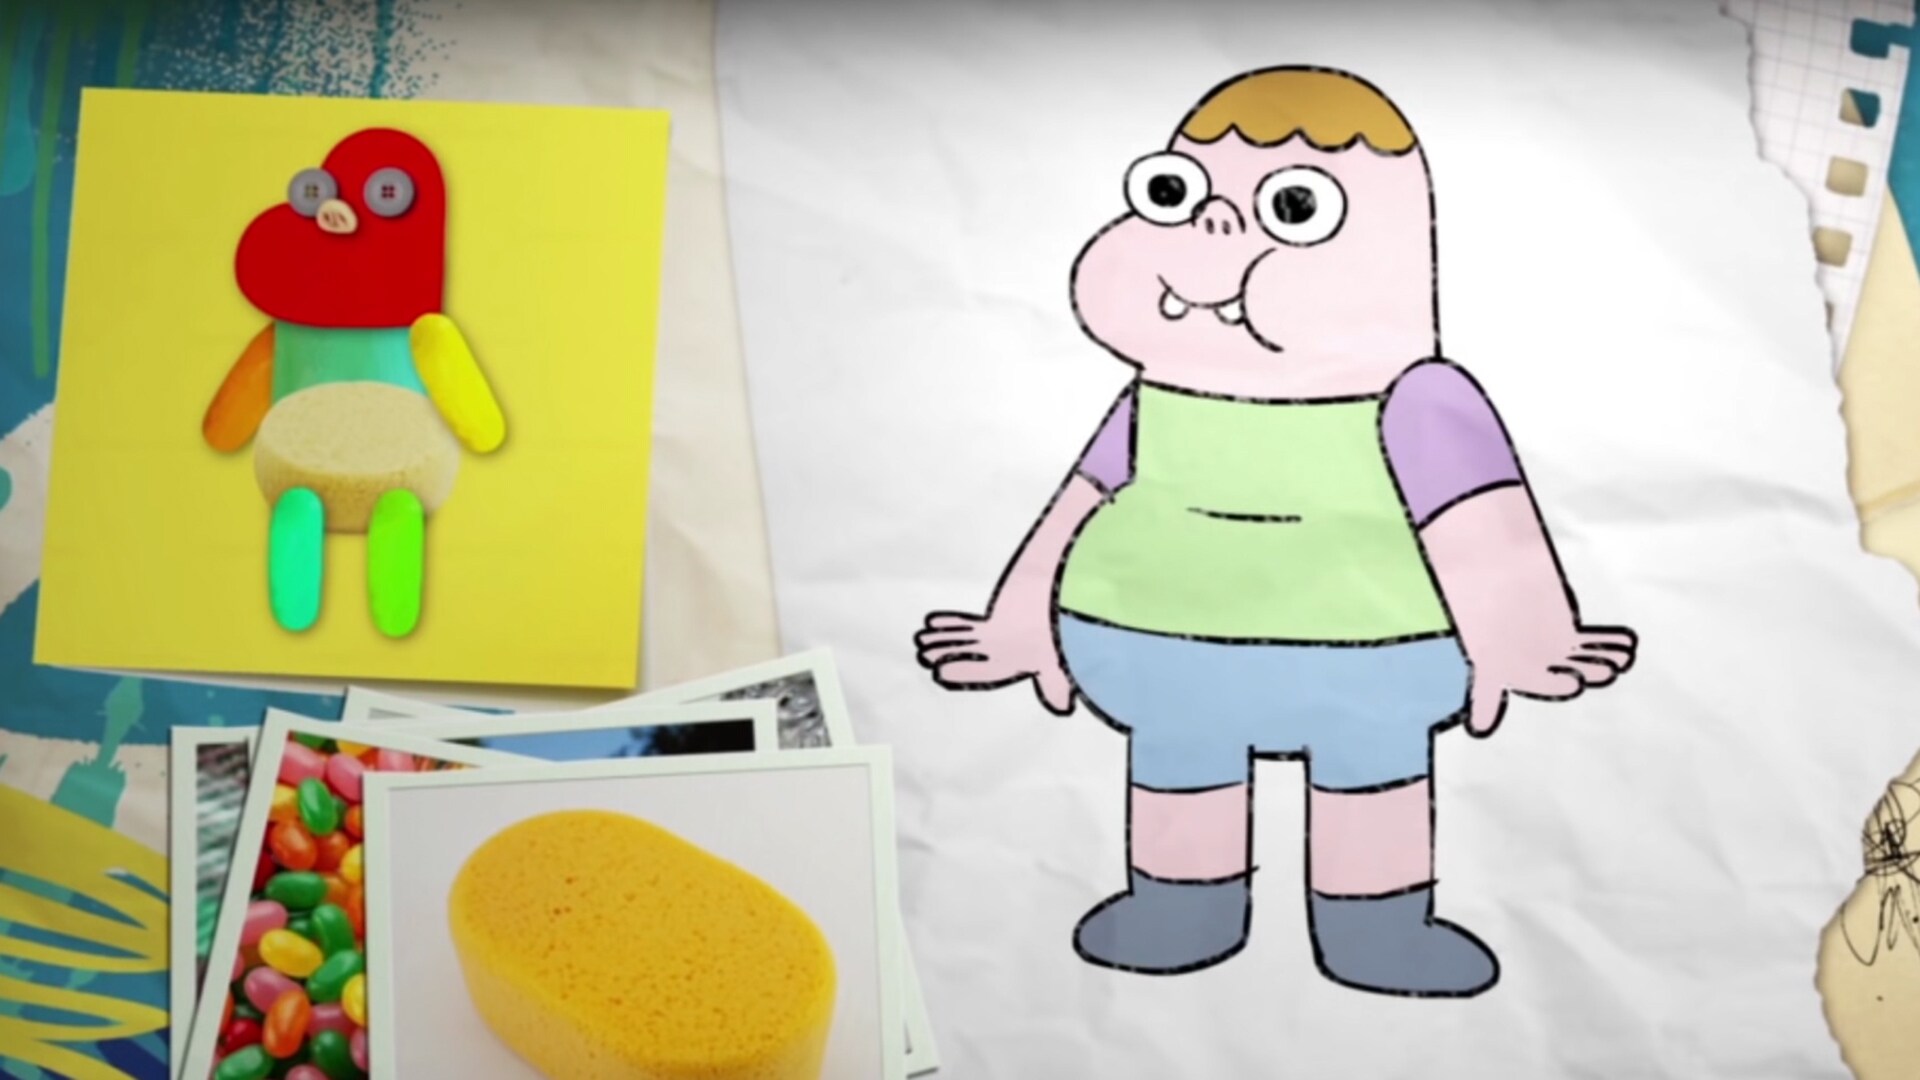 Master How to Draw Chad from Clarence in 11 Easy Steps